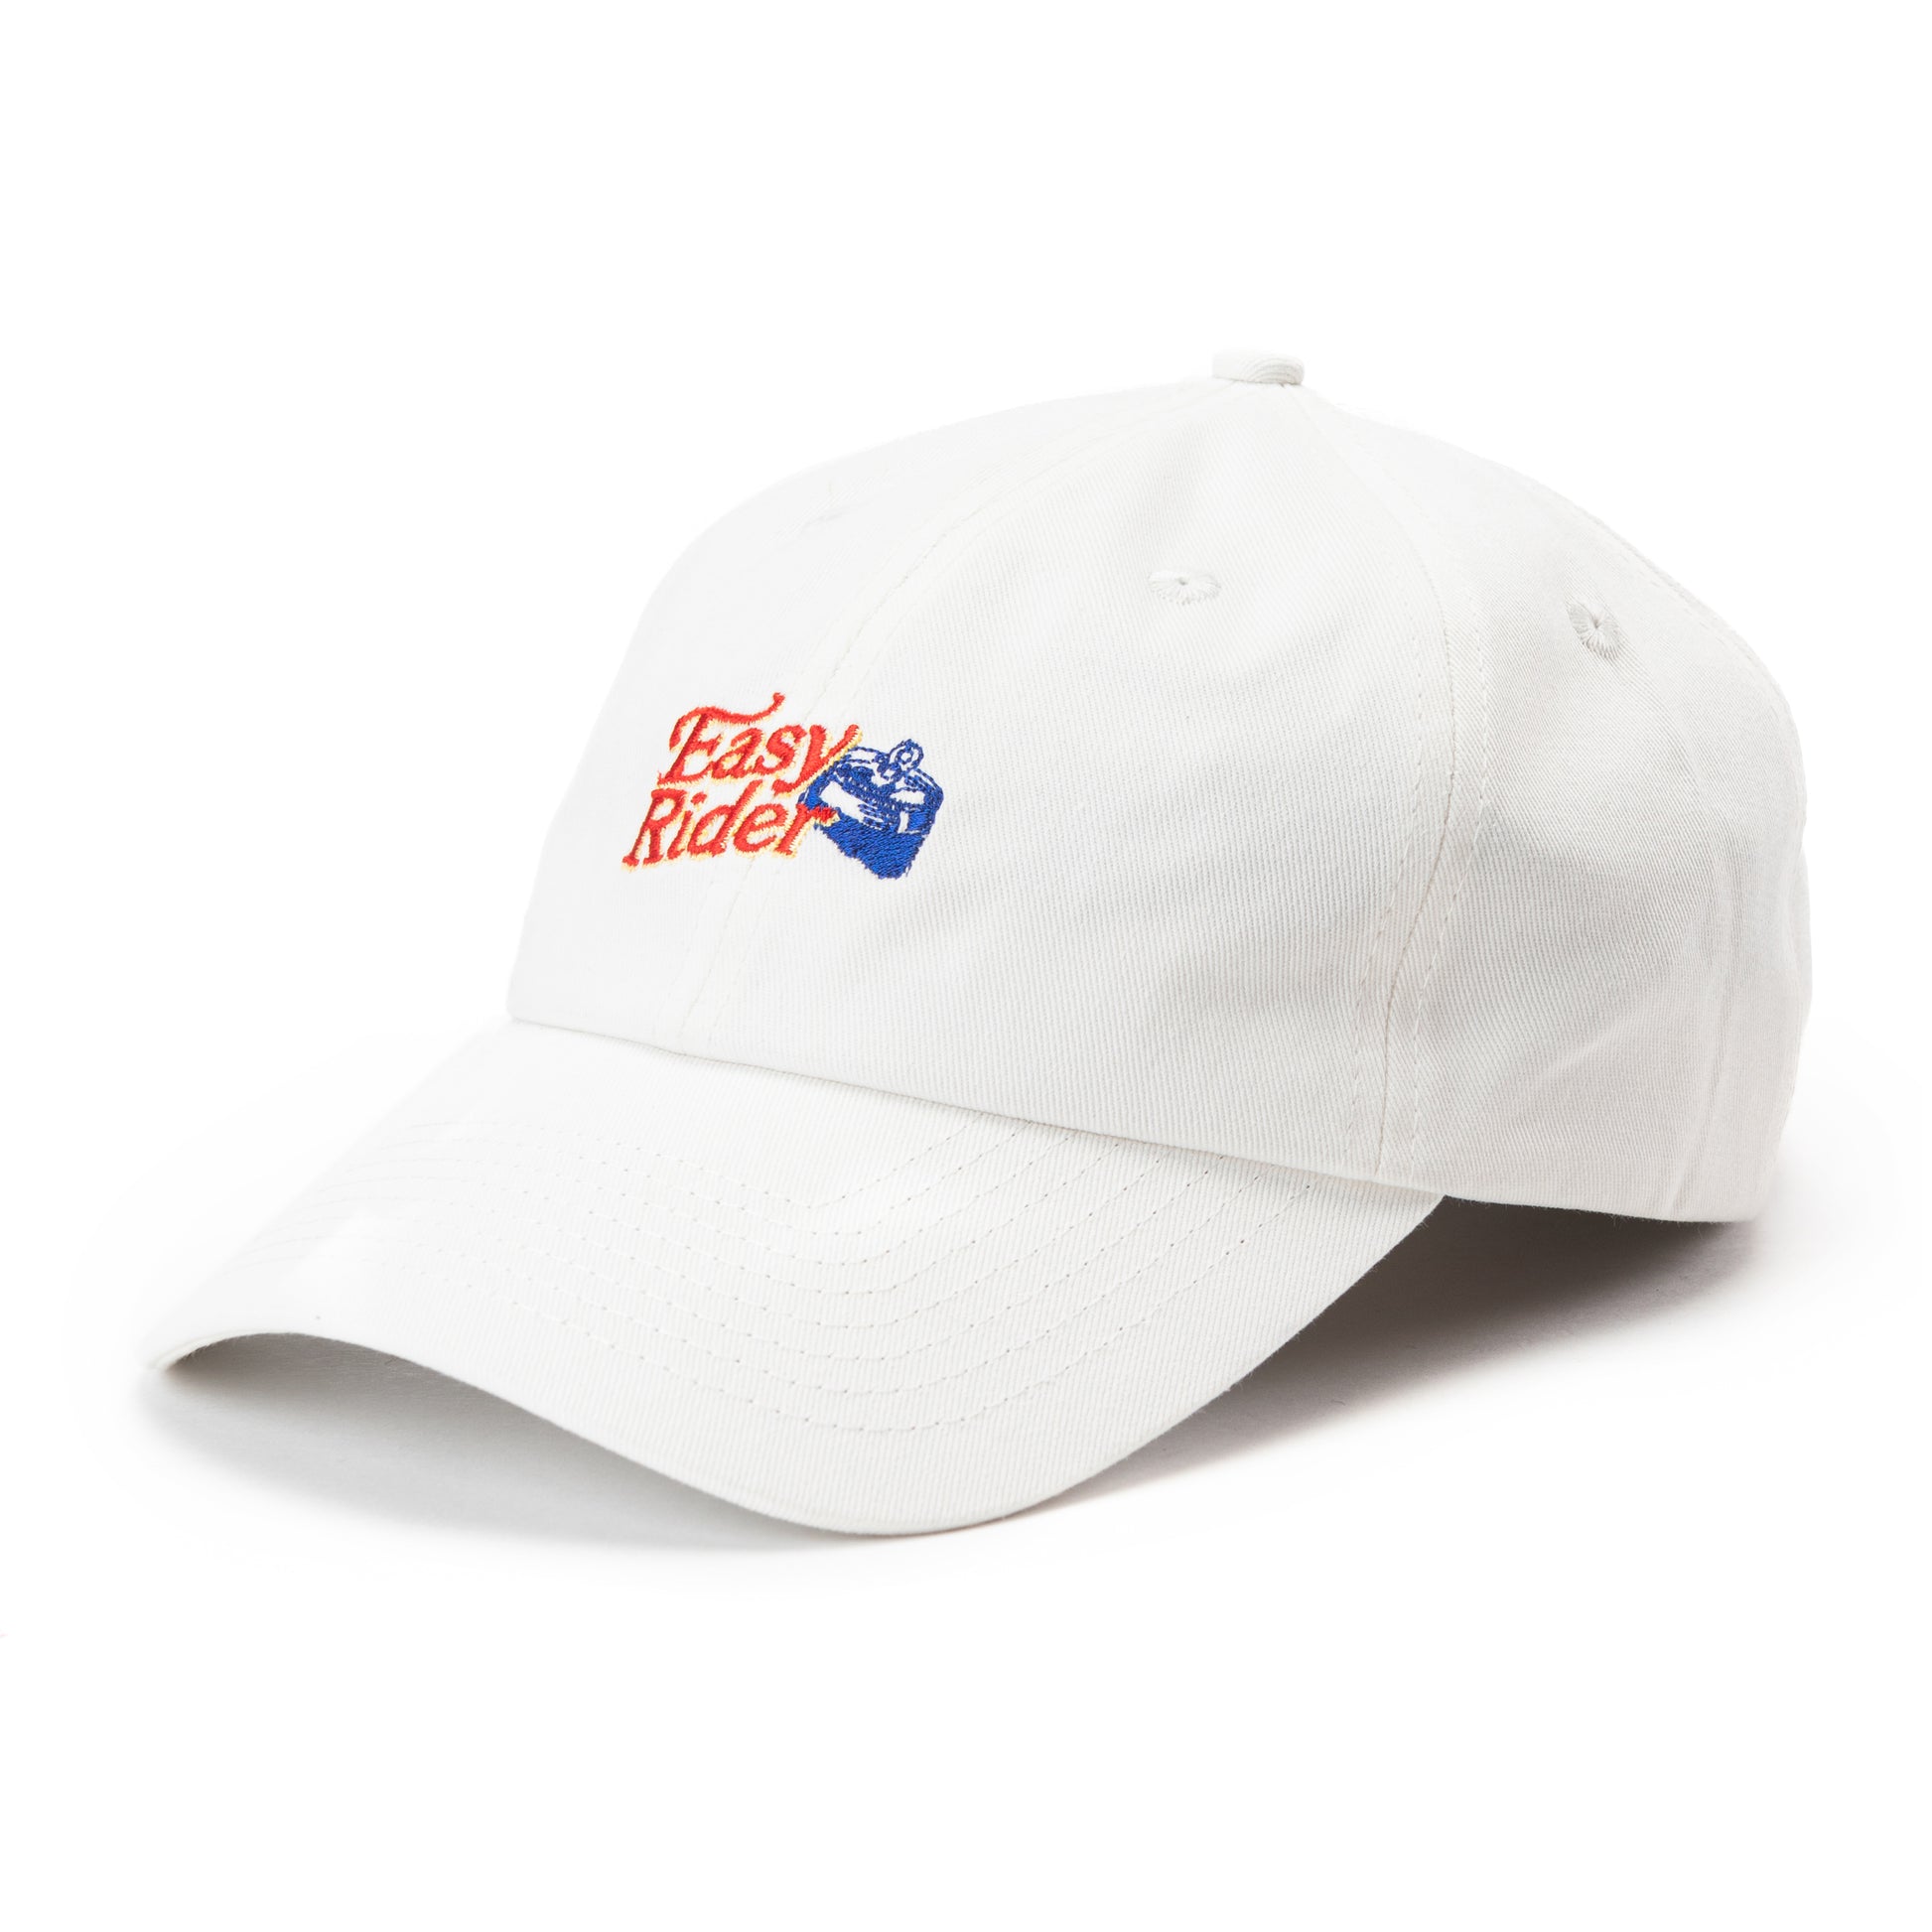 Side View of White "dad style" hat with embroidered Easy Rider logo in red and image of the top of open can in blue.